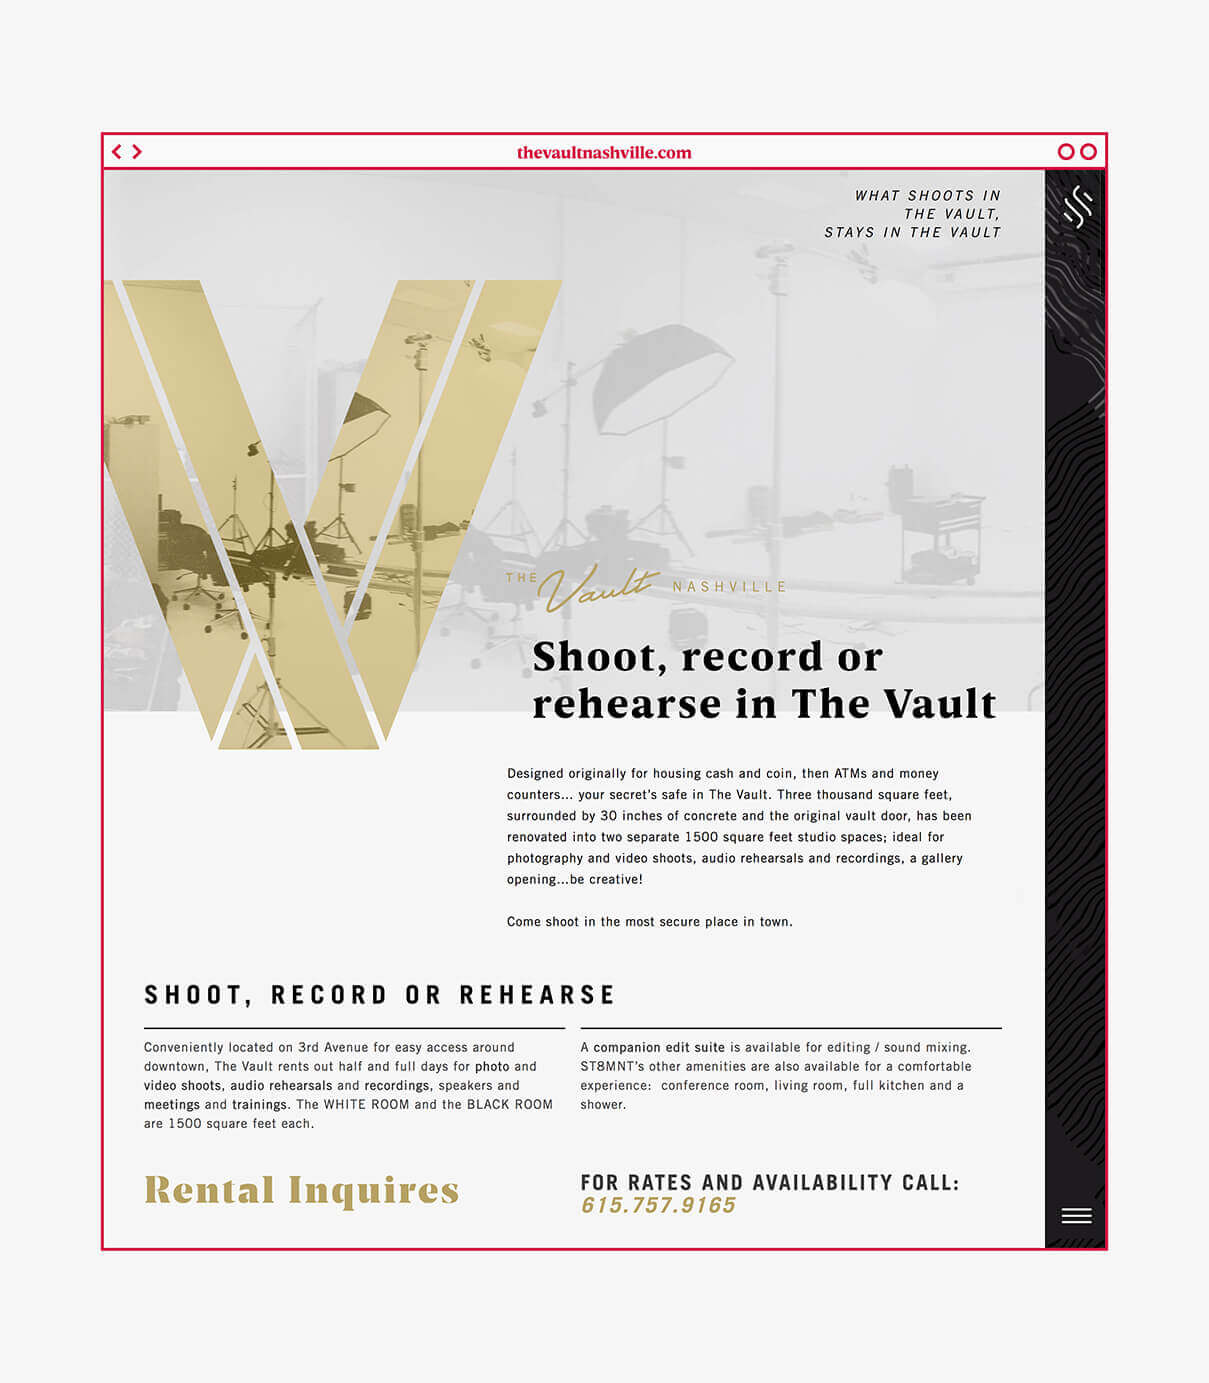 Landing webpage for The vault featuring gold V and imagery of the rental space in use